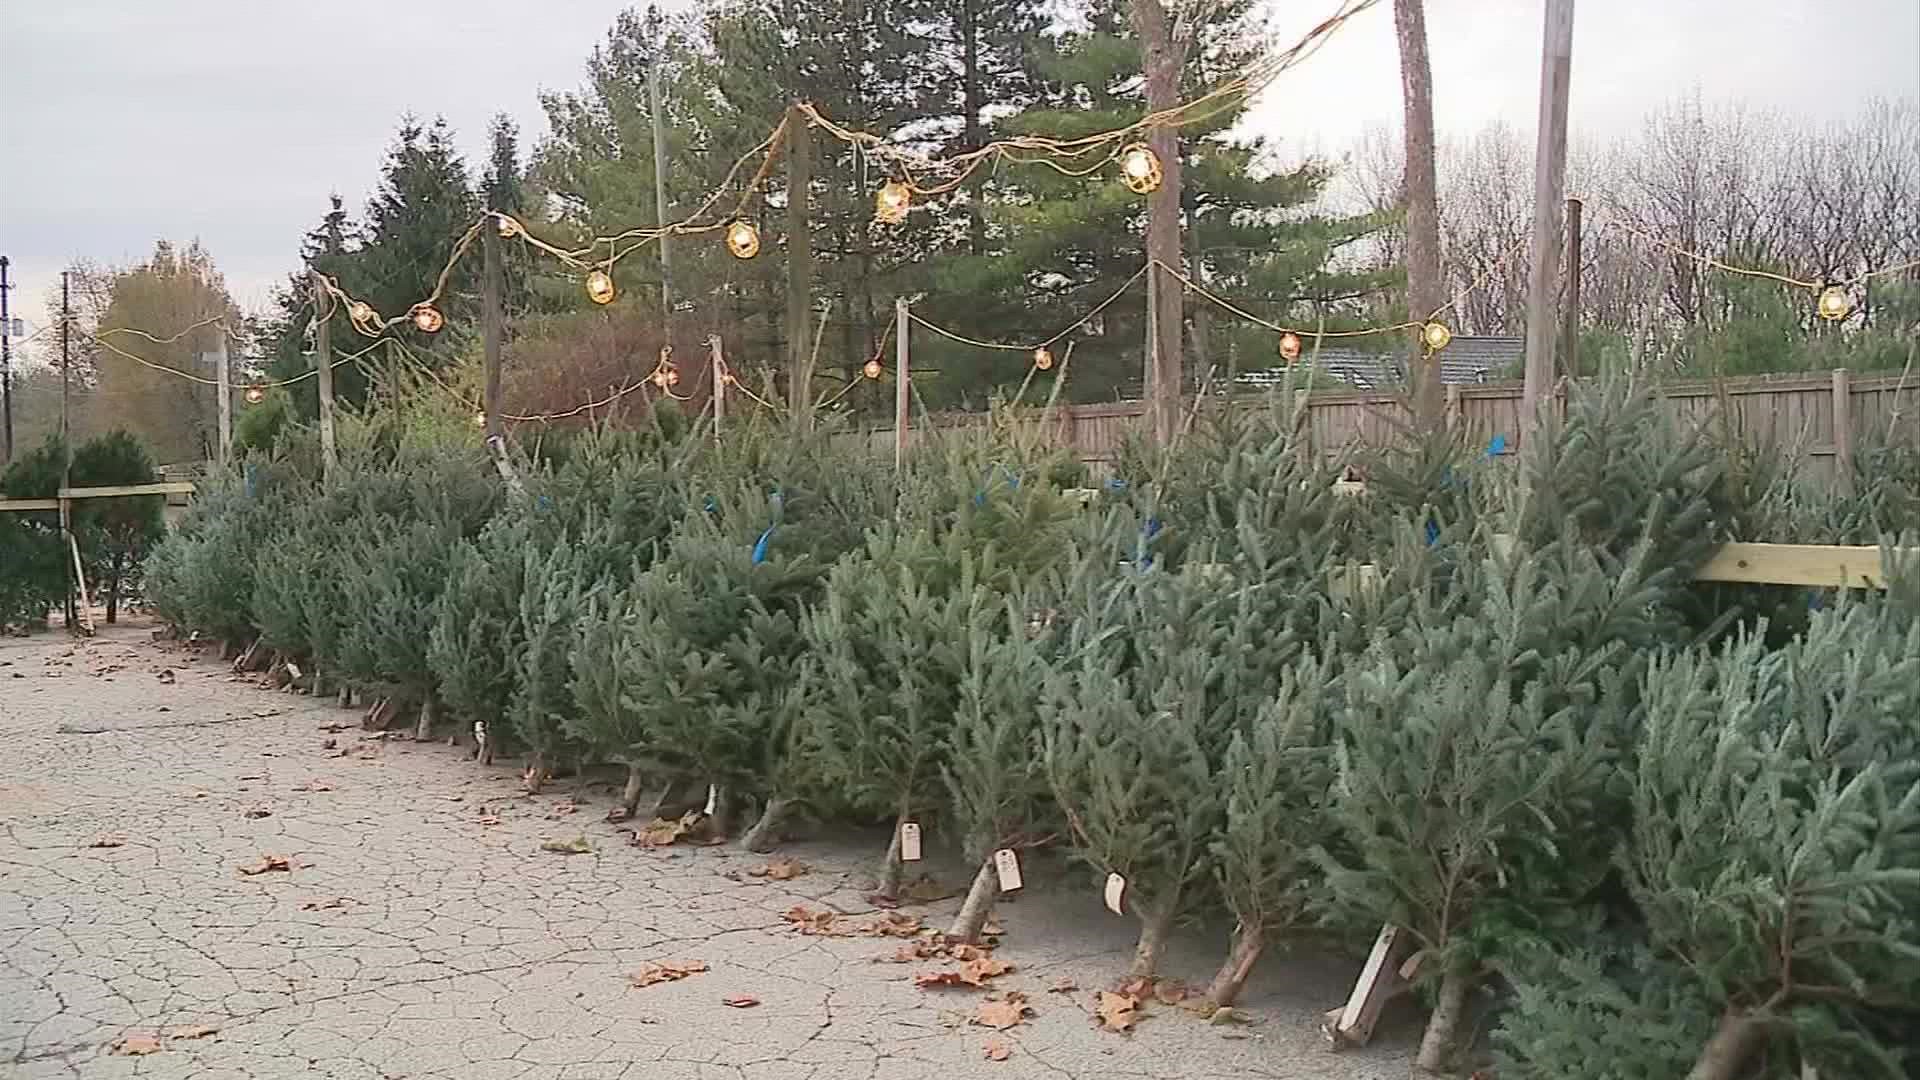 Your Christmas tree could last a little longer depending the species and upkeep.